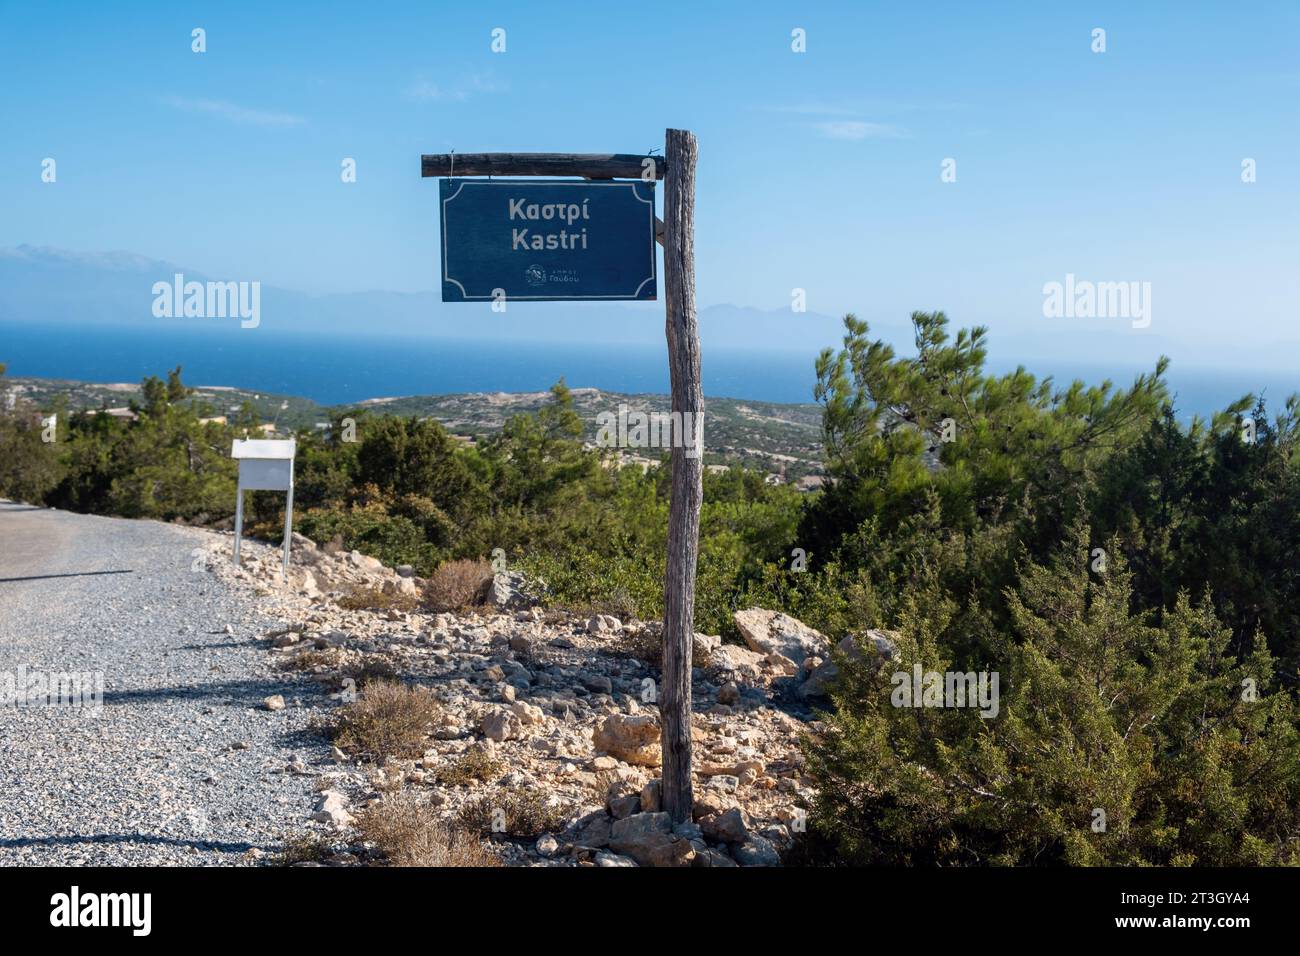 Metal hanging old sign with Kastri logo on wooden pole at Gavdos island, Crete Greece. Information label about village name background. Stock Photo